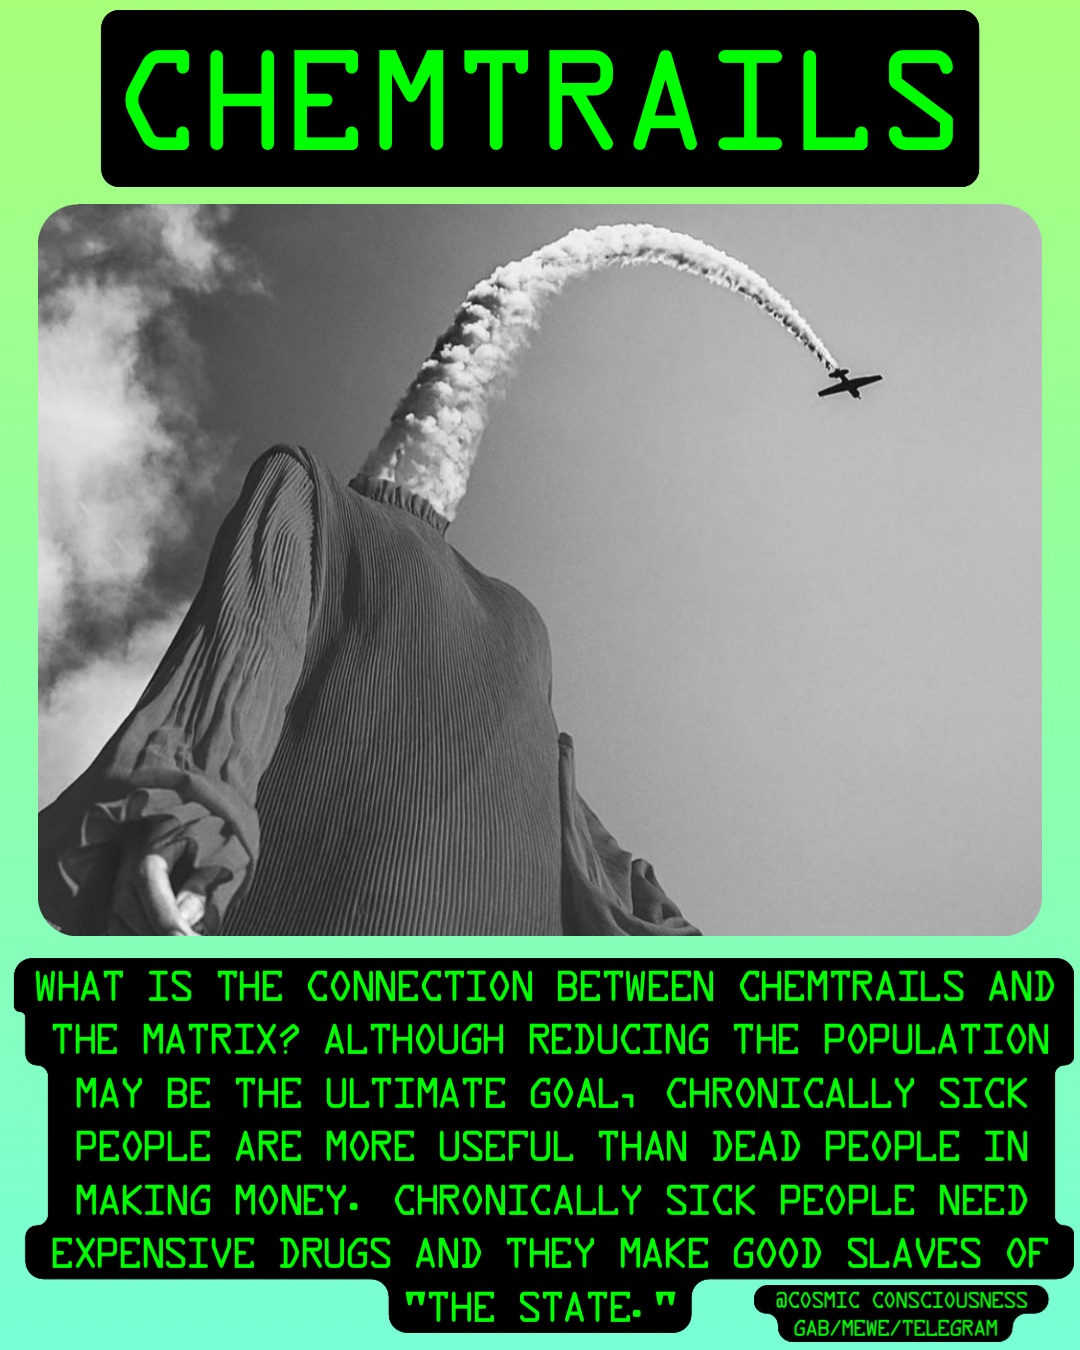 Chemtrails What is the Connection between Chemtrails and the MATRIX? Although reducing the population may be the ultimate goal, chronically sick people are more useful than dead people in making money. Chronically sick people need expensive drugs and they make good slaves of "the State." @Cosmic Consciousness 
Gab/MeWe/Telegram